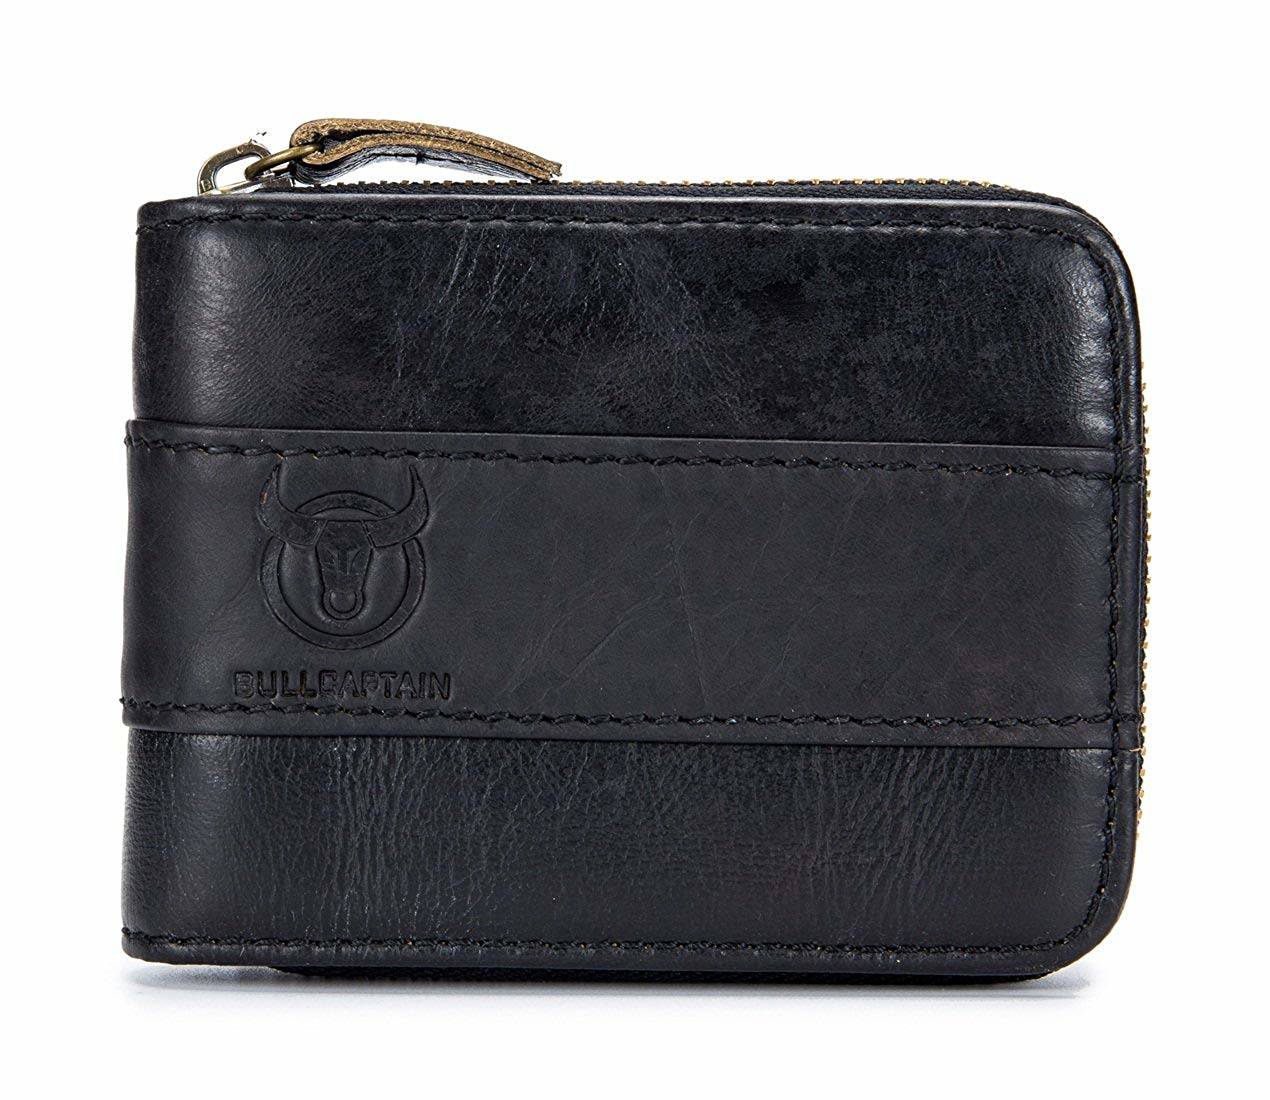 CARTER Leather Trifold Credit Card Zipper Coin Pocket- Improving Lifestyles